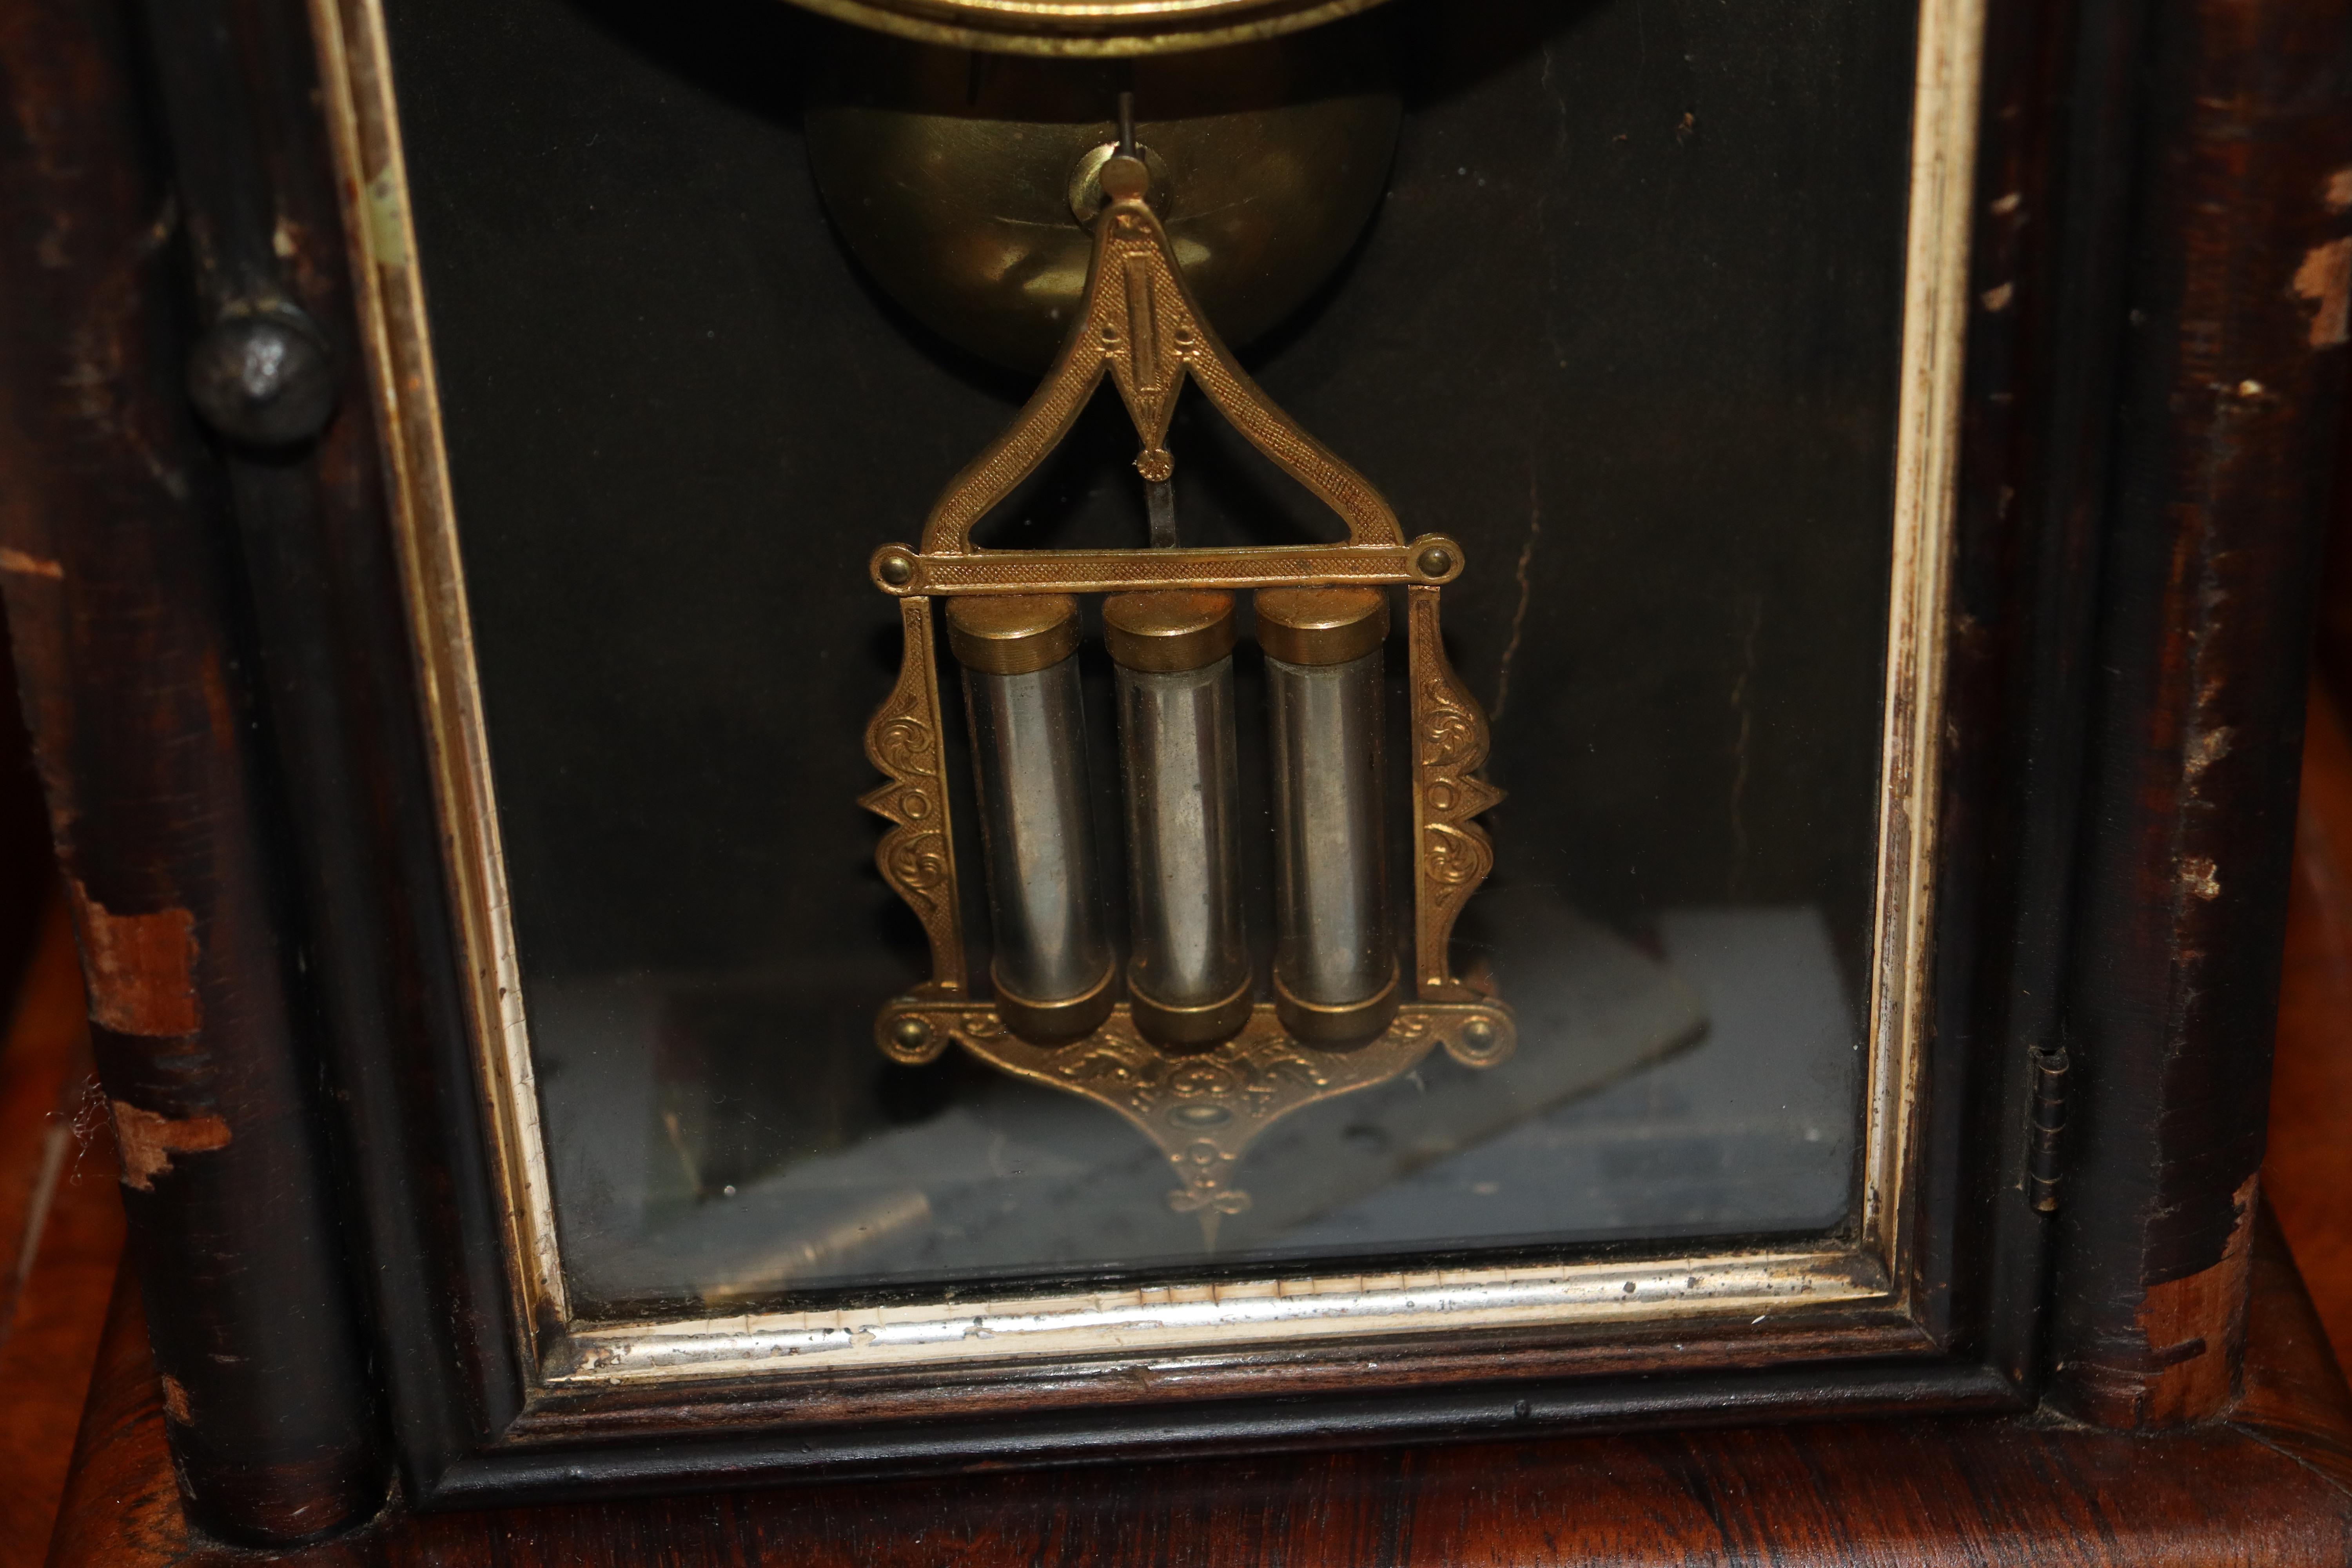 An American parlour mantel clock by E.N. Welsh For - Image 3 of 3